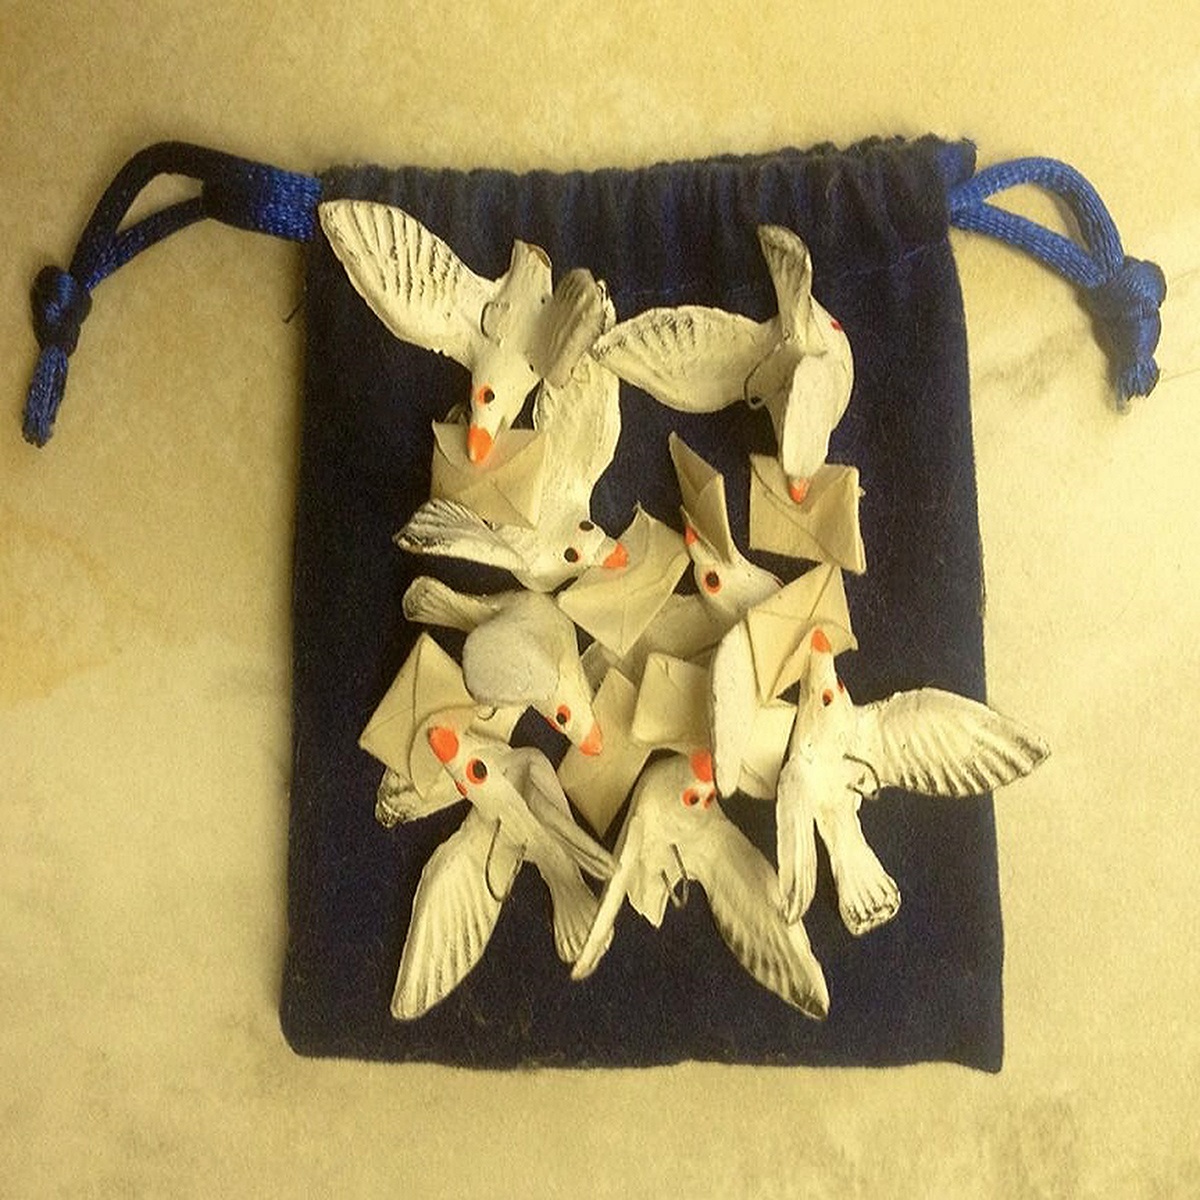 'flight of Mexican carrier pigeon ornaments' by Steve Gentile